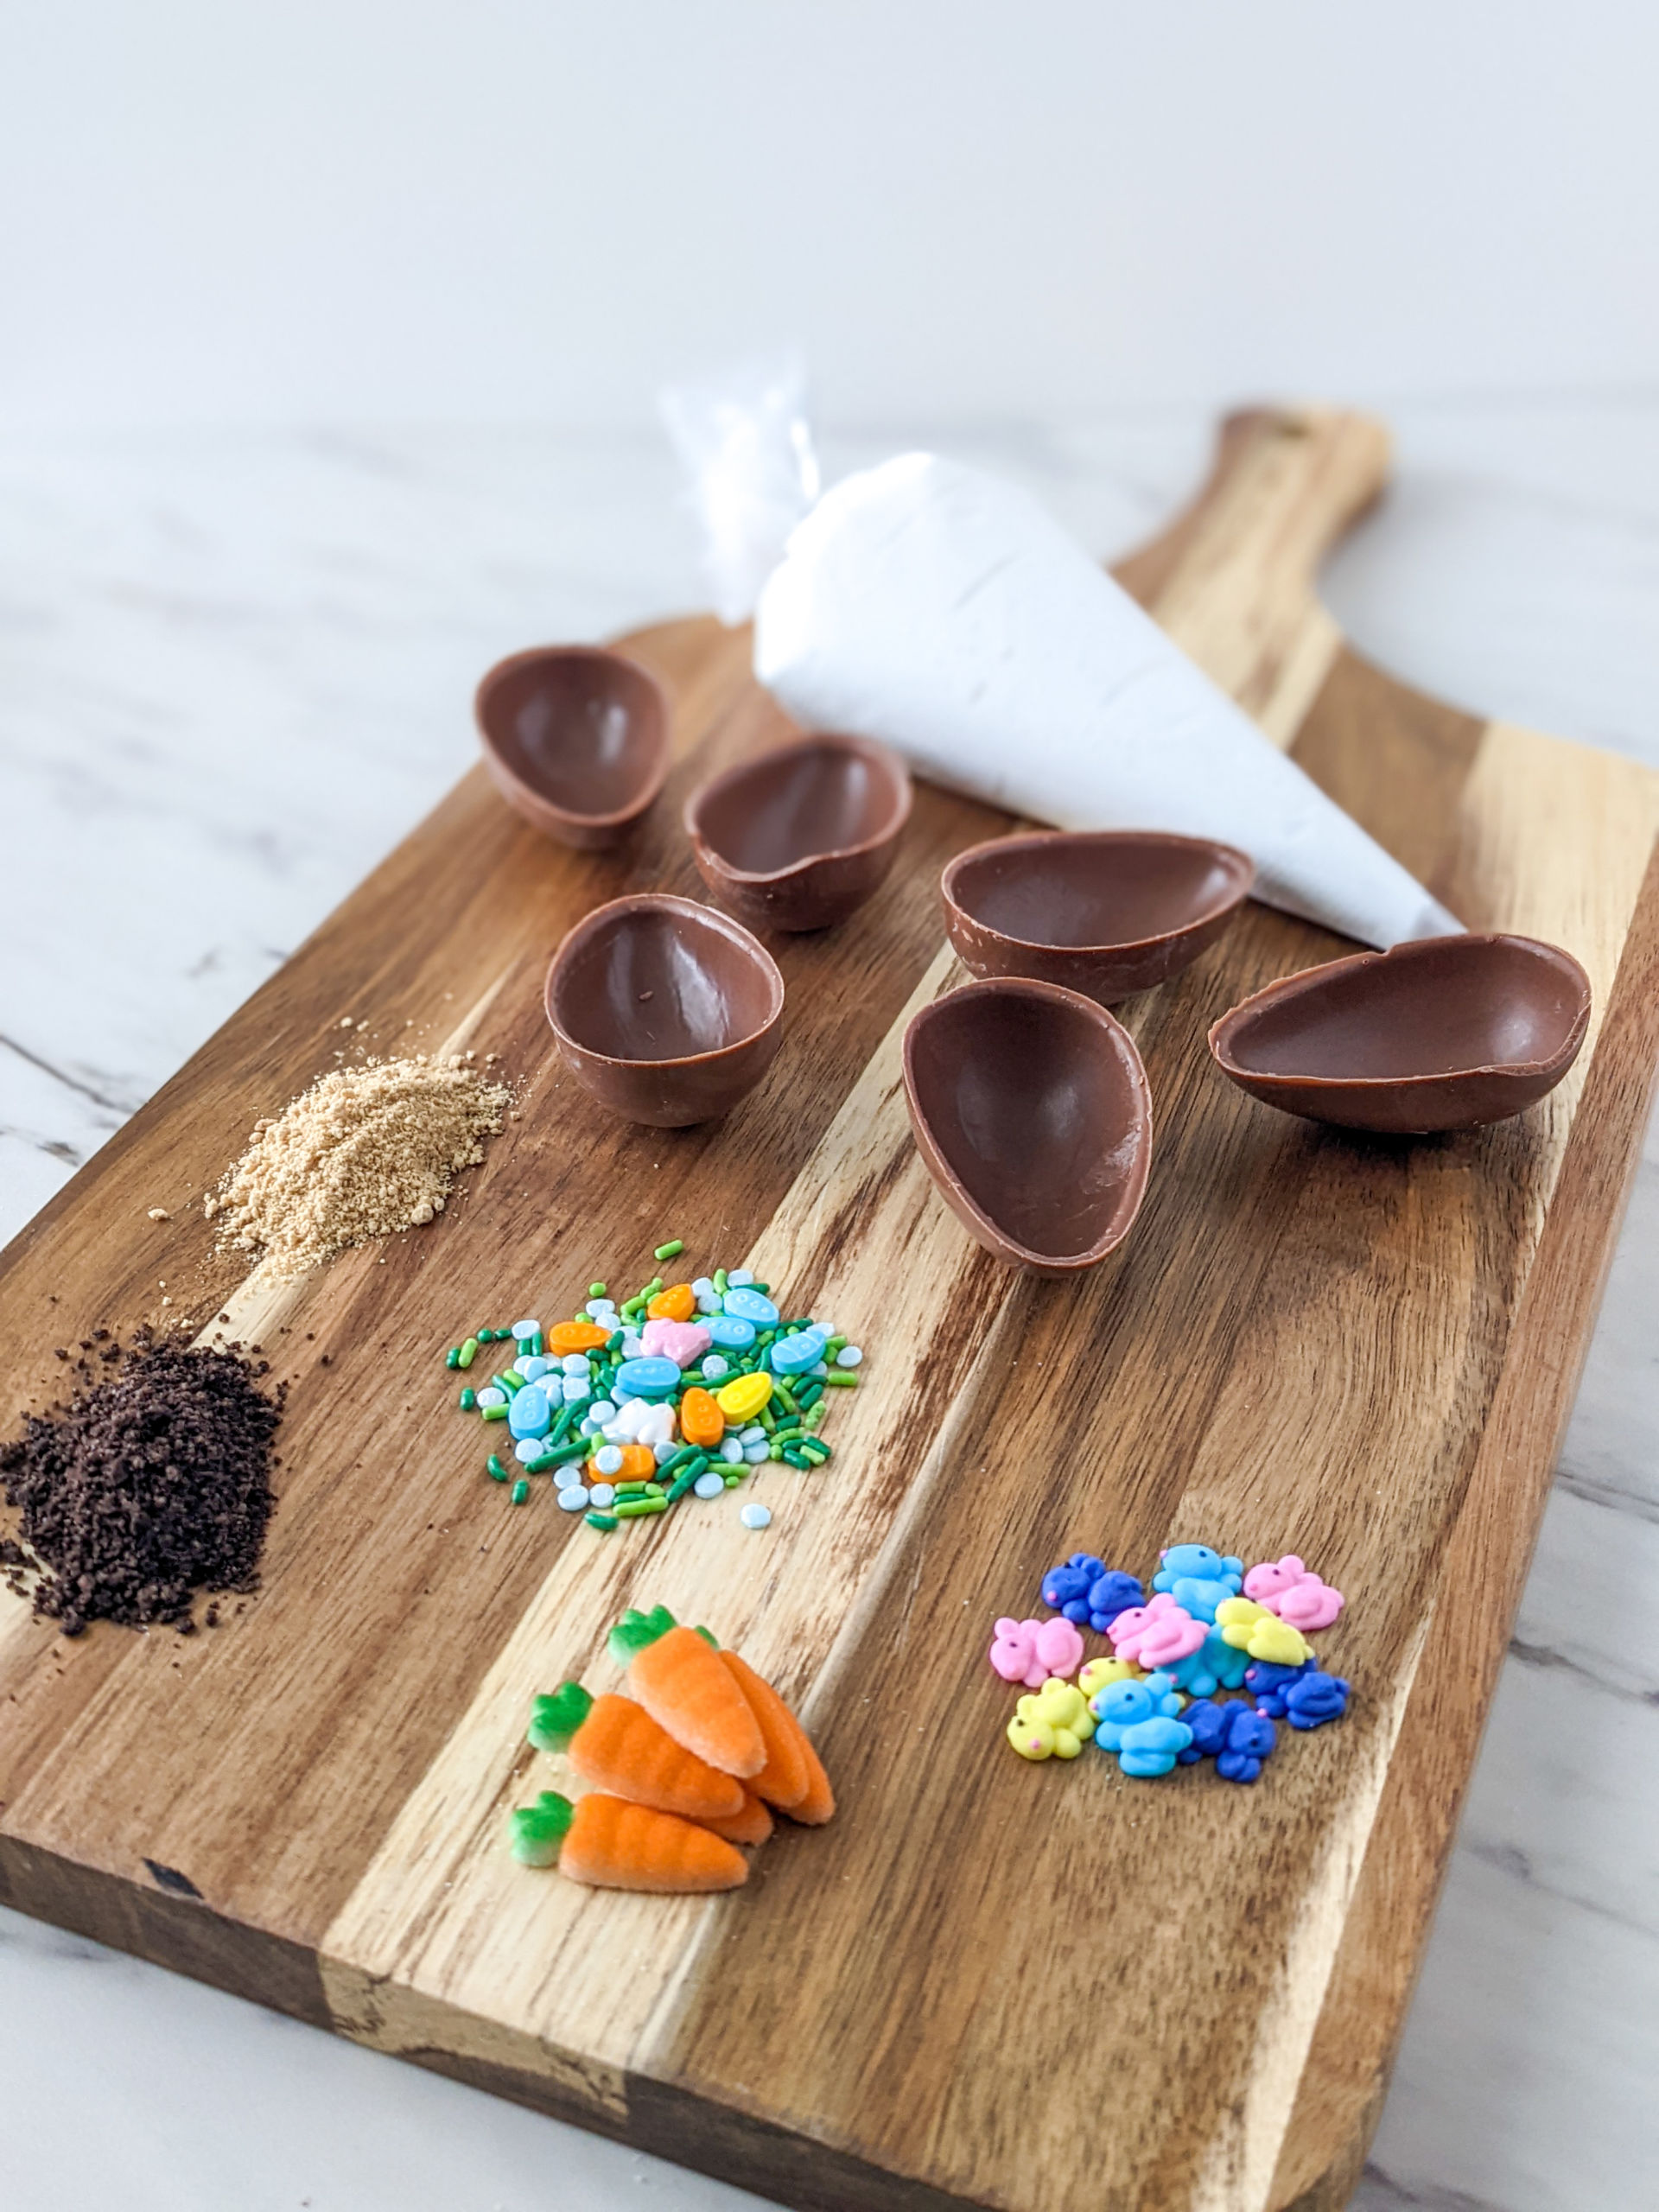 A photo of empty chocolate egg shells and easter sprinkles next to it on a table